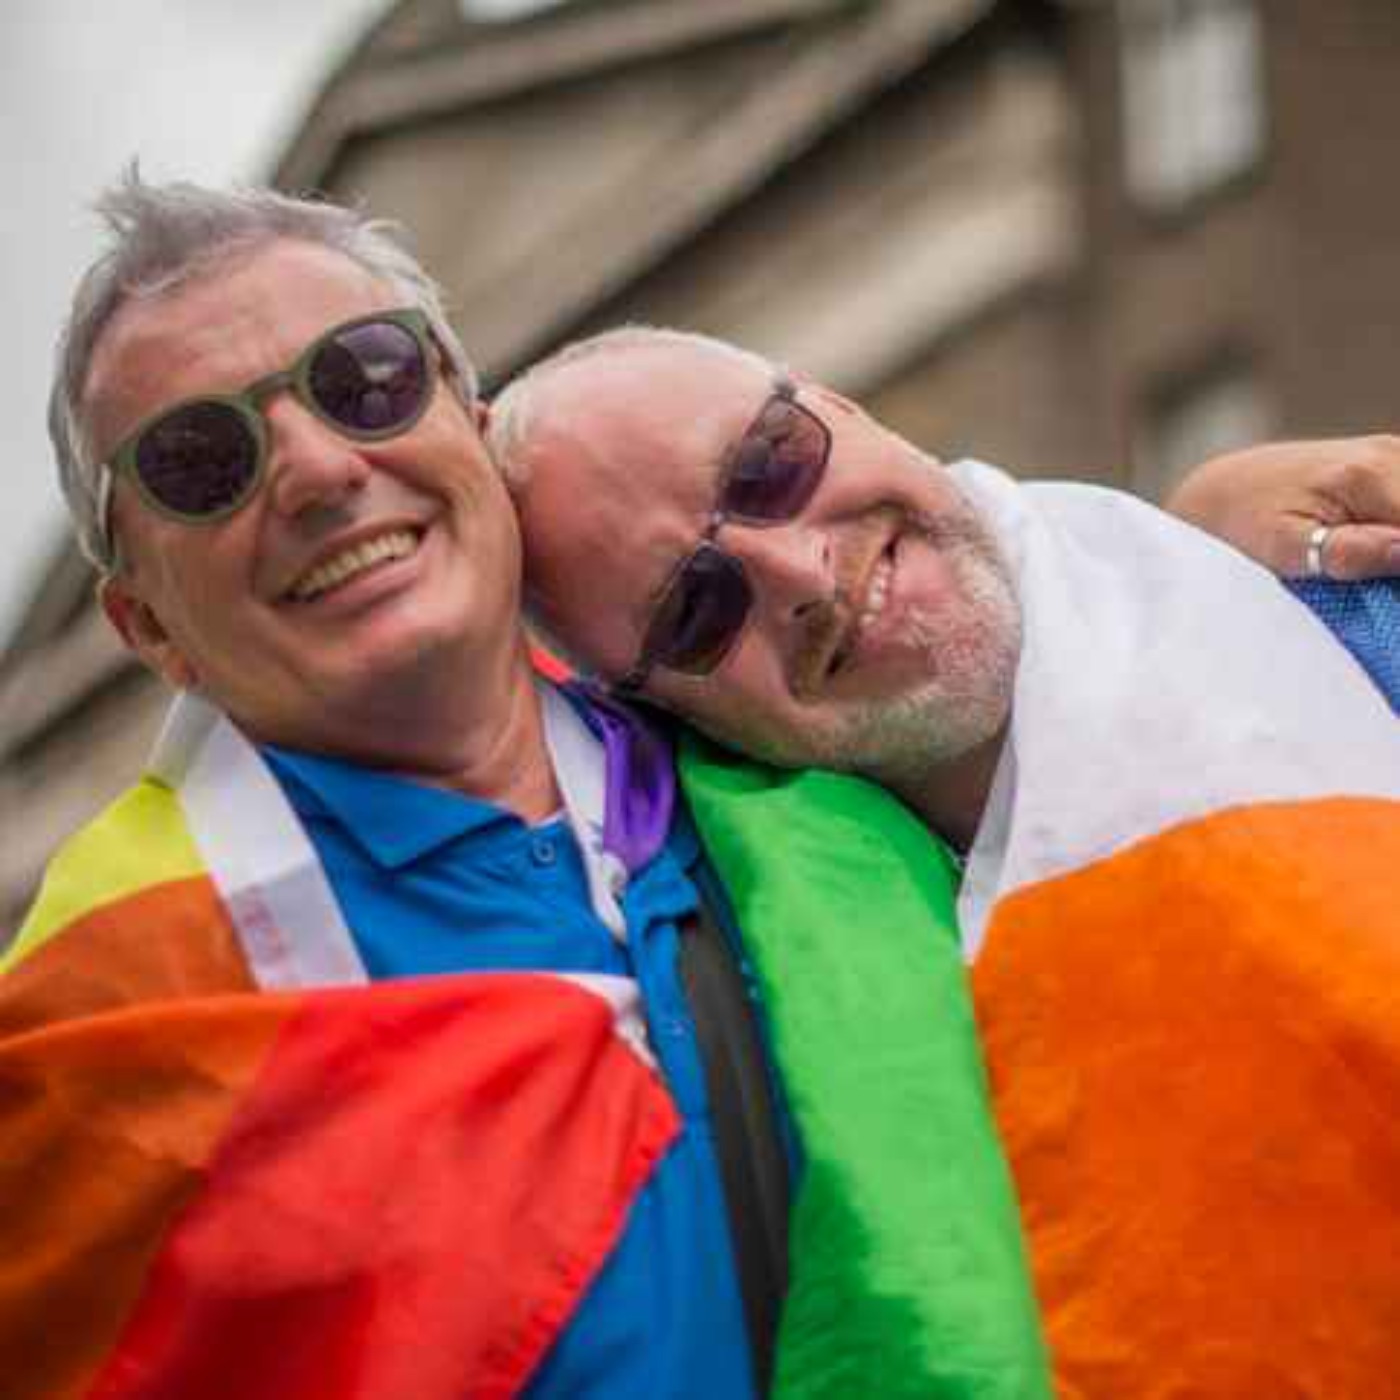 Chairperson of Limerick Pride discusses plans for parade